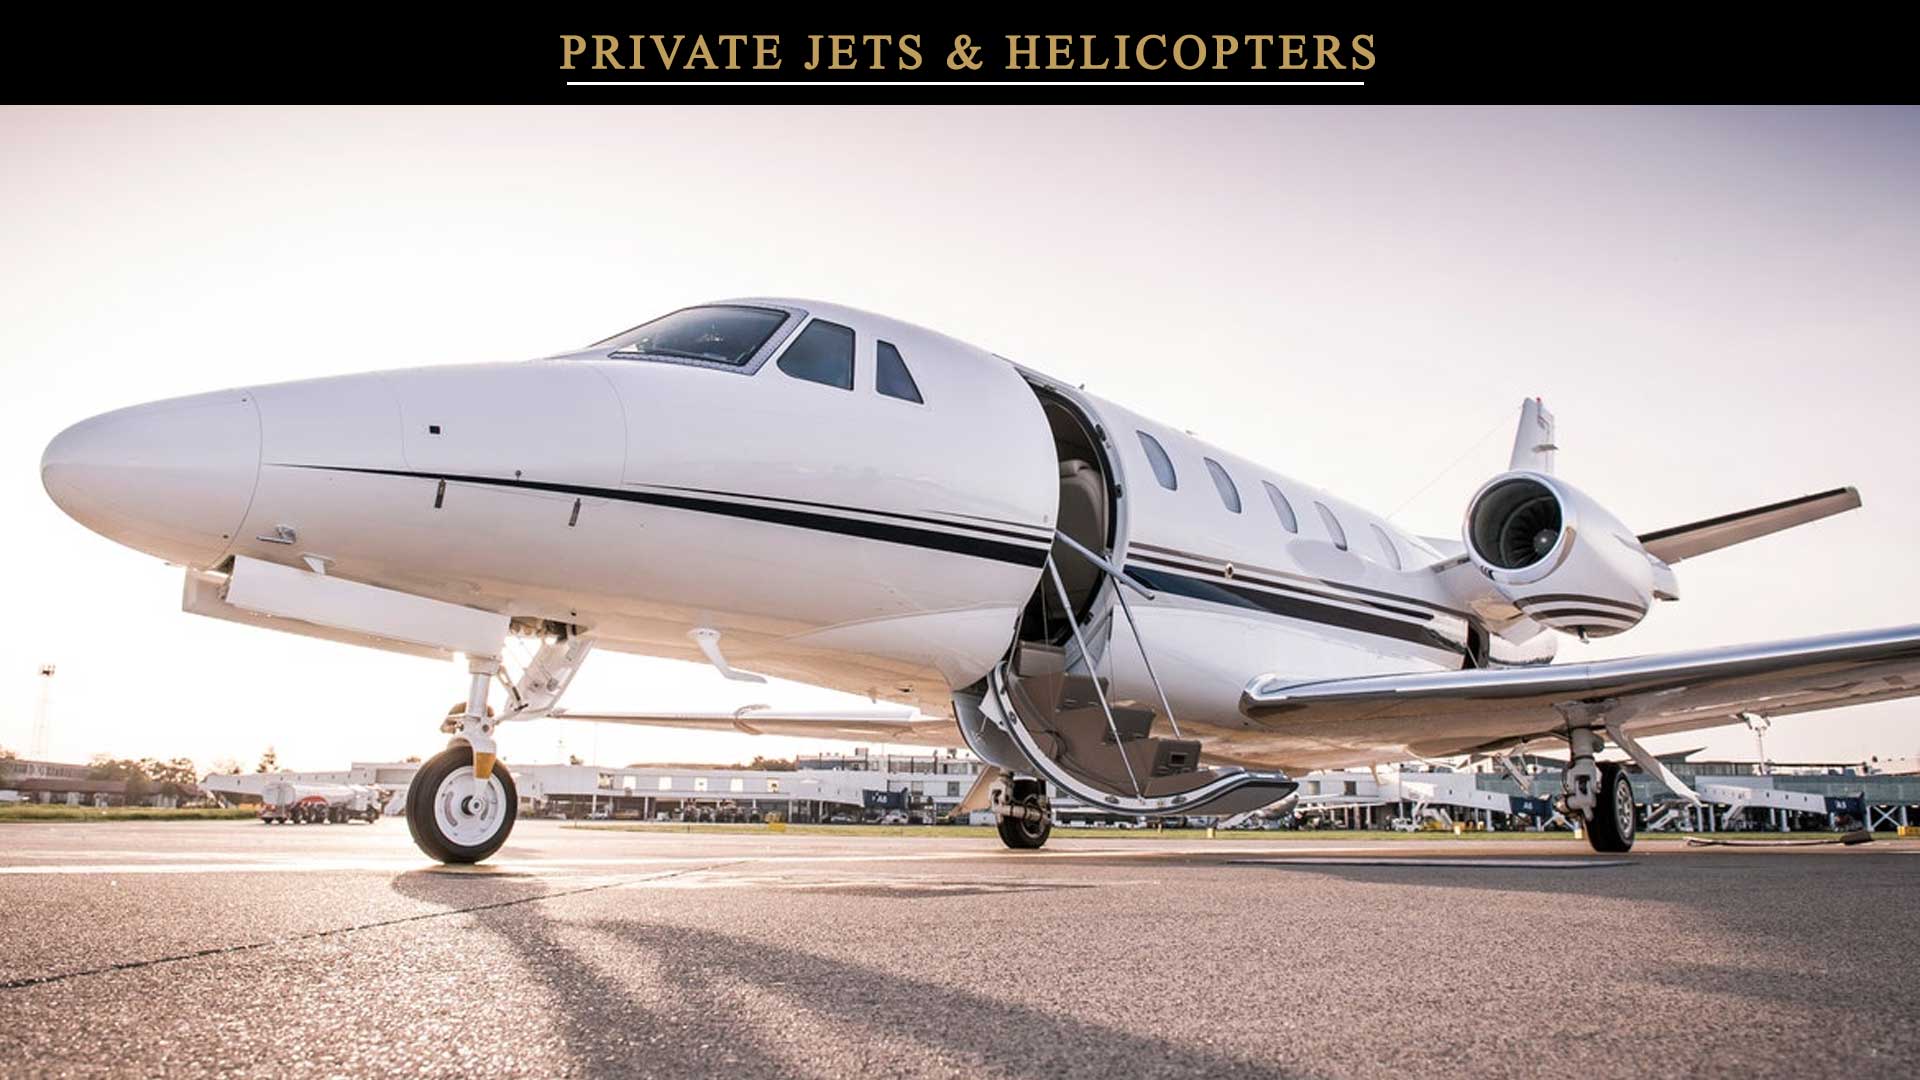 VIP Concierge Private Jets and Helicopters SALT Luxury Miami